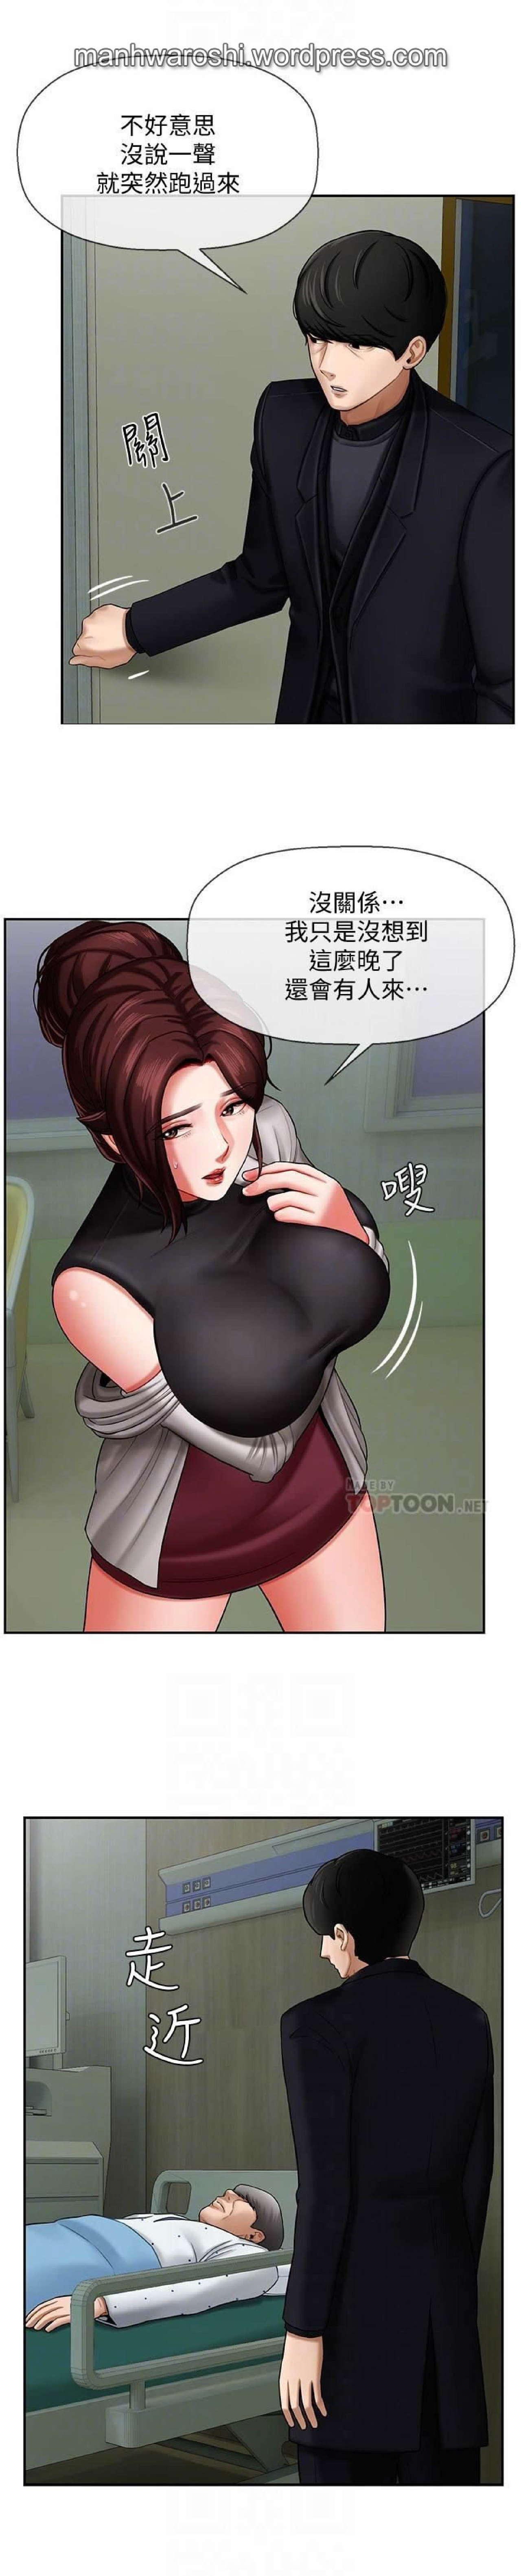 Shecock 坏老师 | PHYSICAL CLASSROOM 3 Playing - Page 6